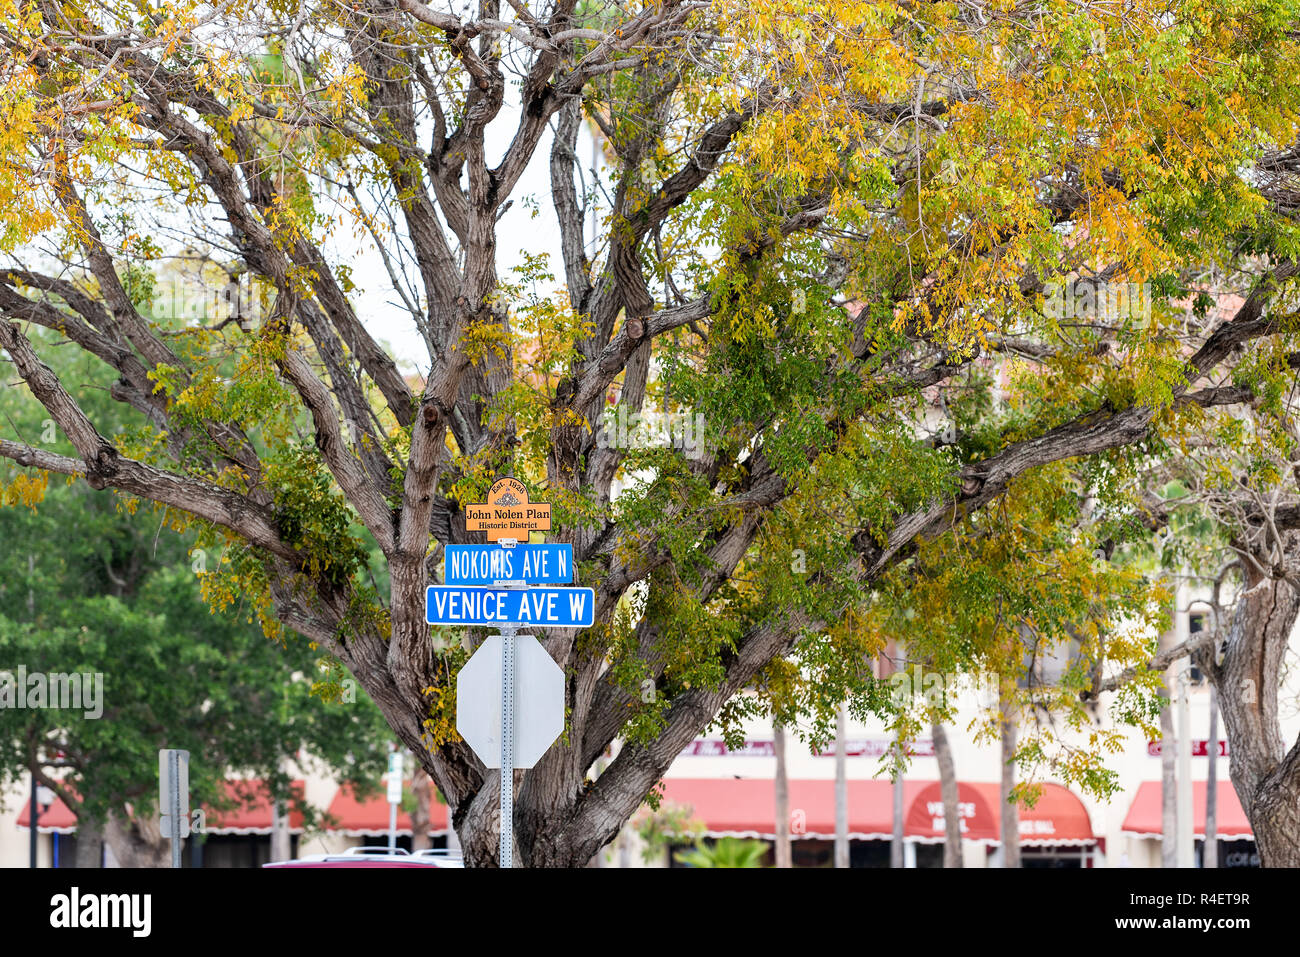 Venice, USA - April 29, 2018: Intersection sign in small Florida retirement city, town, or village in gulf of Mexico, large tree on street Stock Photo